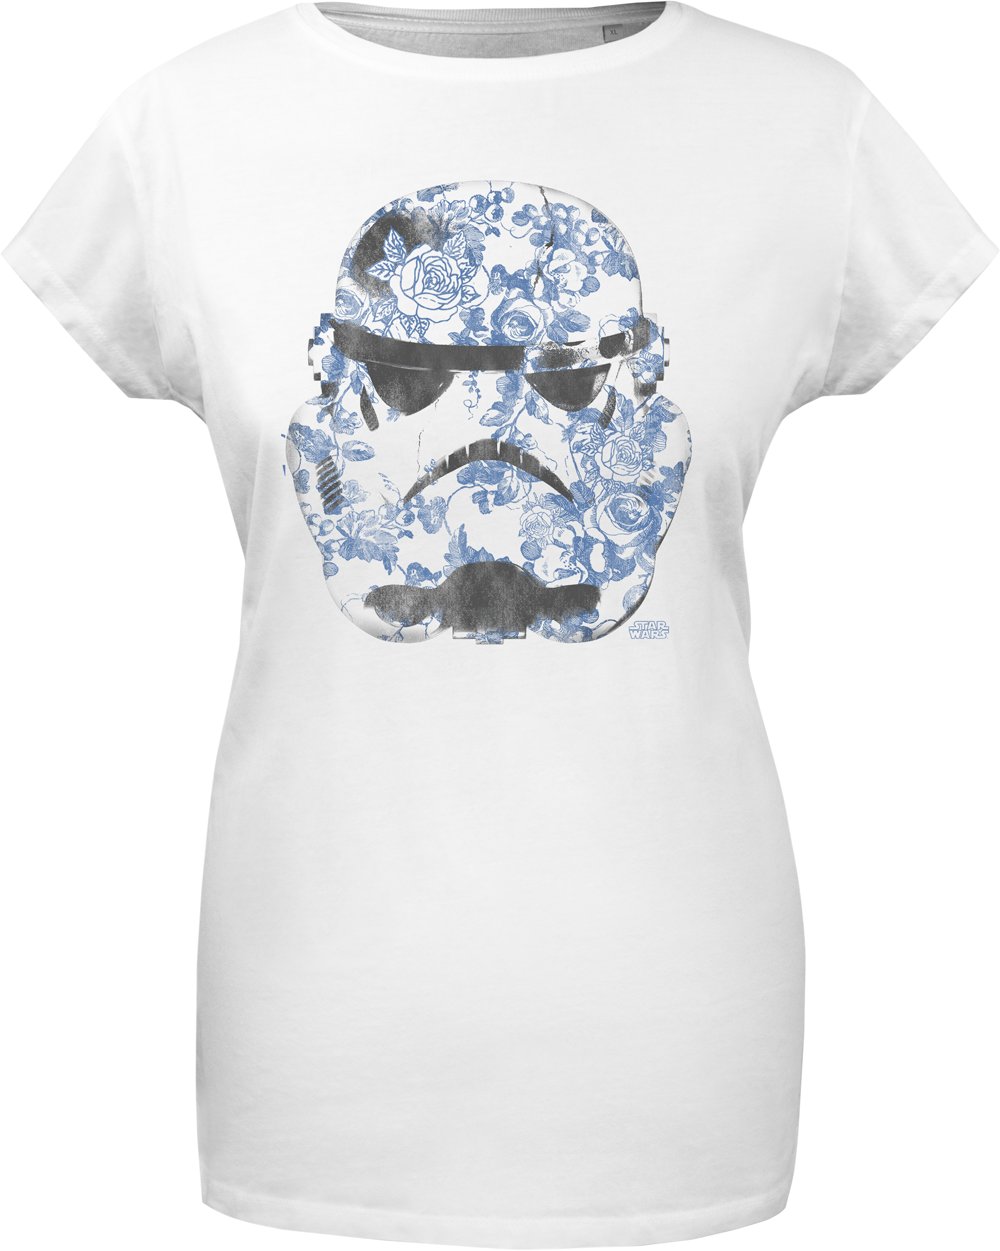 Imperial Stormtrooper - Floral T-shirt画像